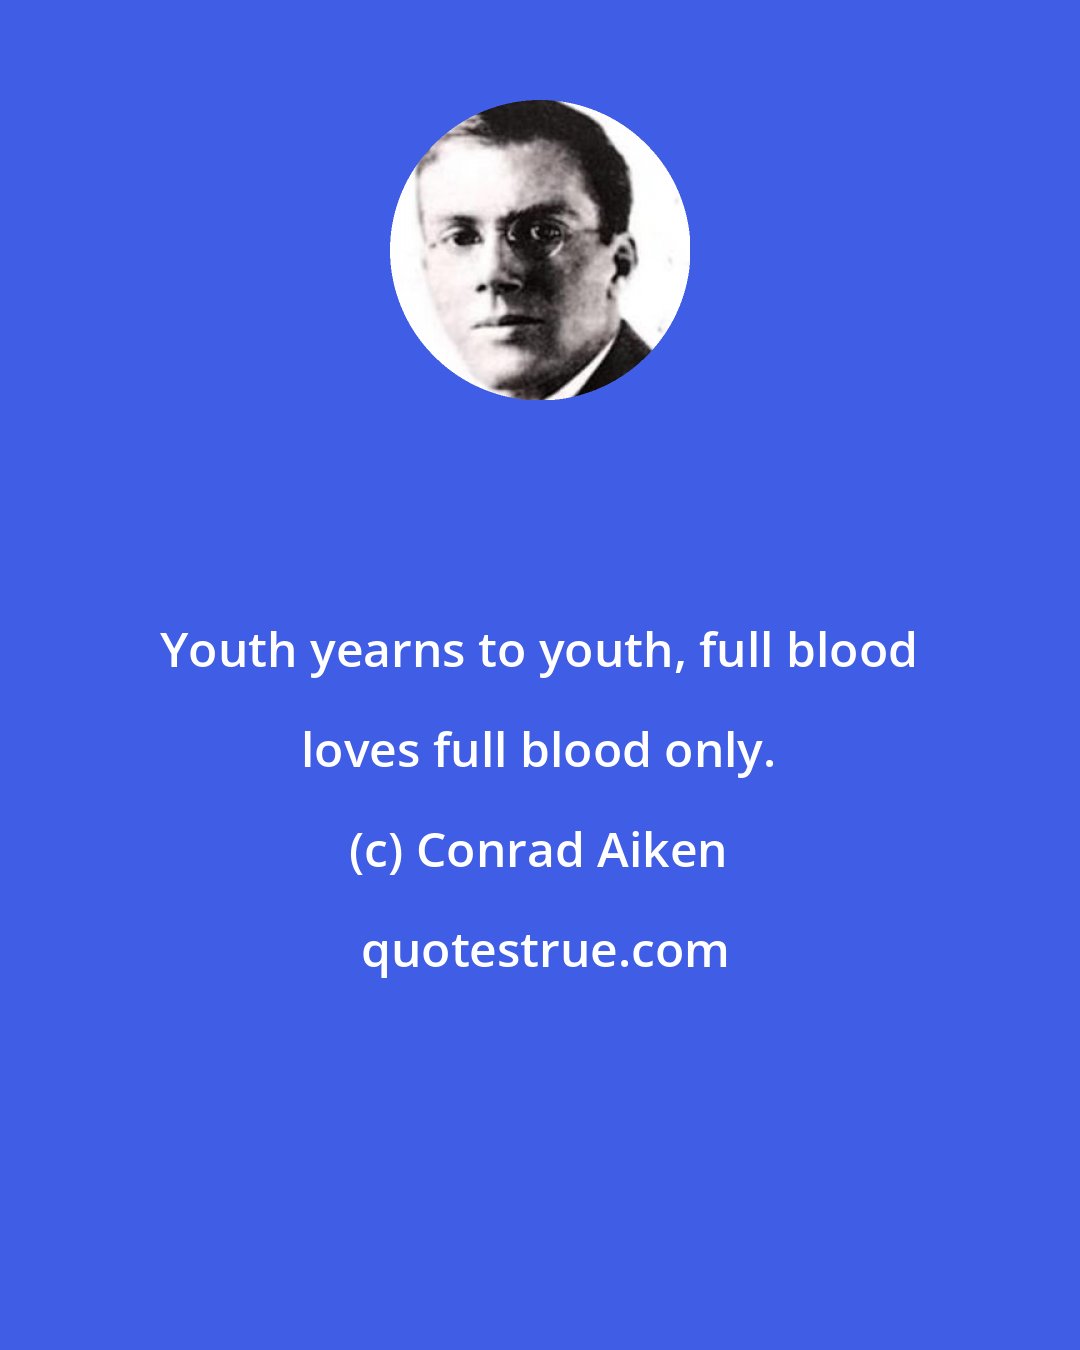 Conrad Aiken: Youth yearns to youth, full blood loves full blood only.